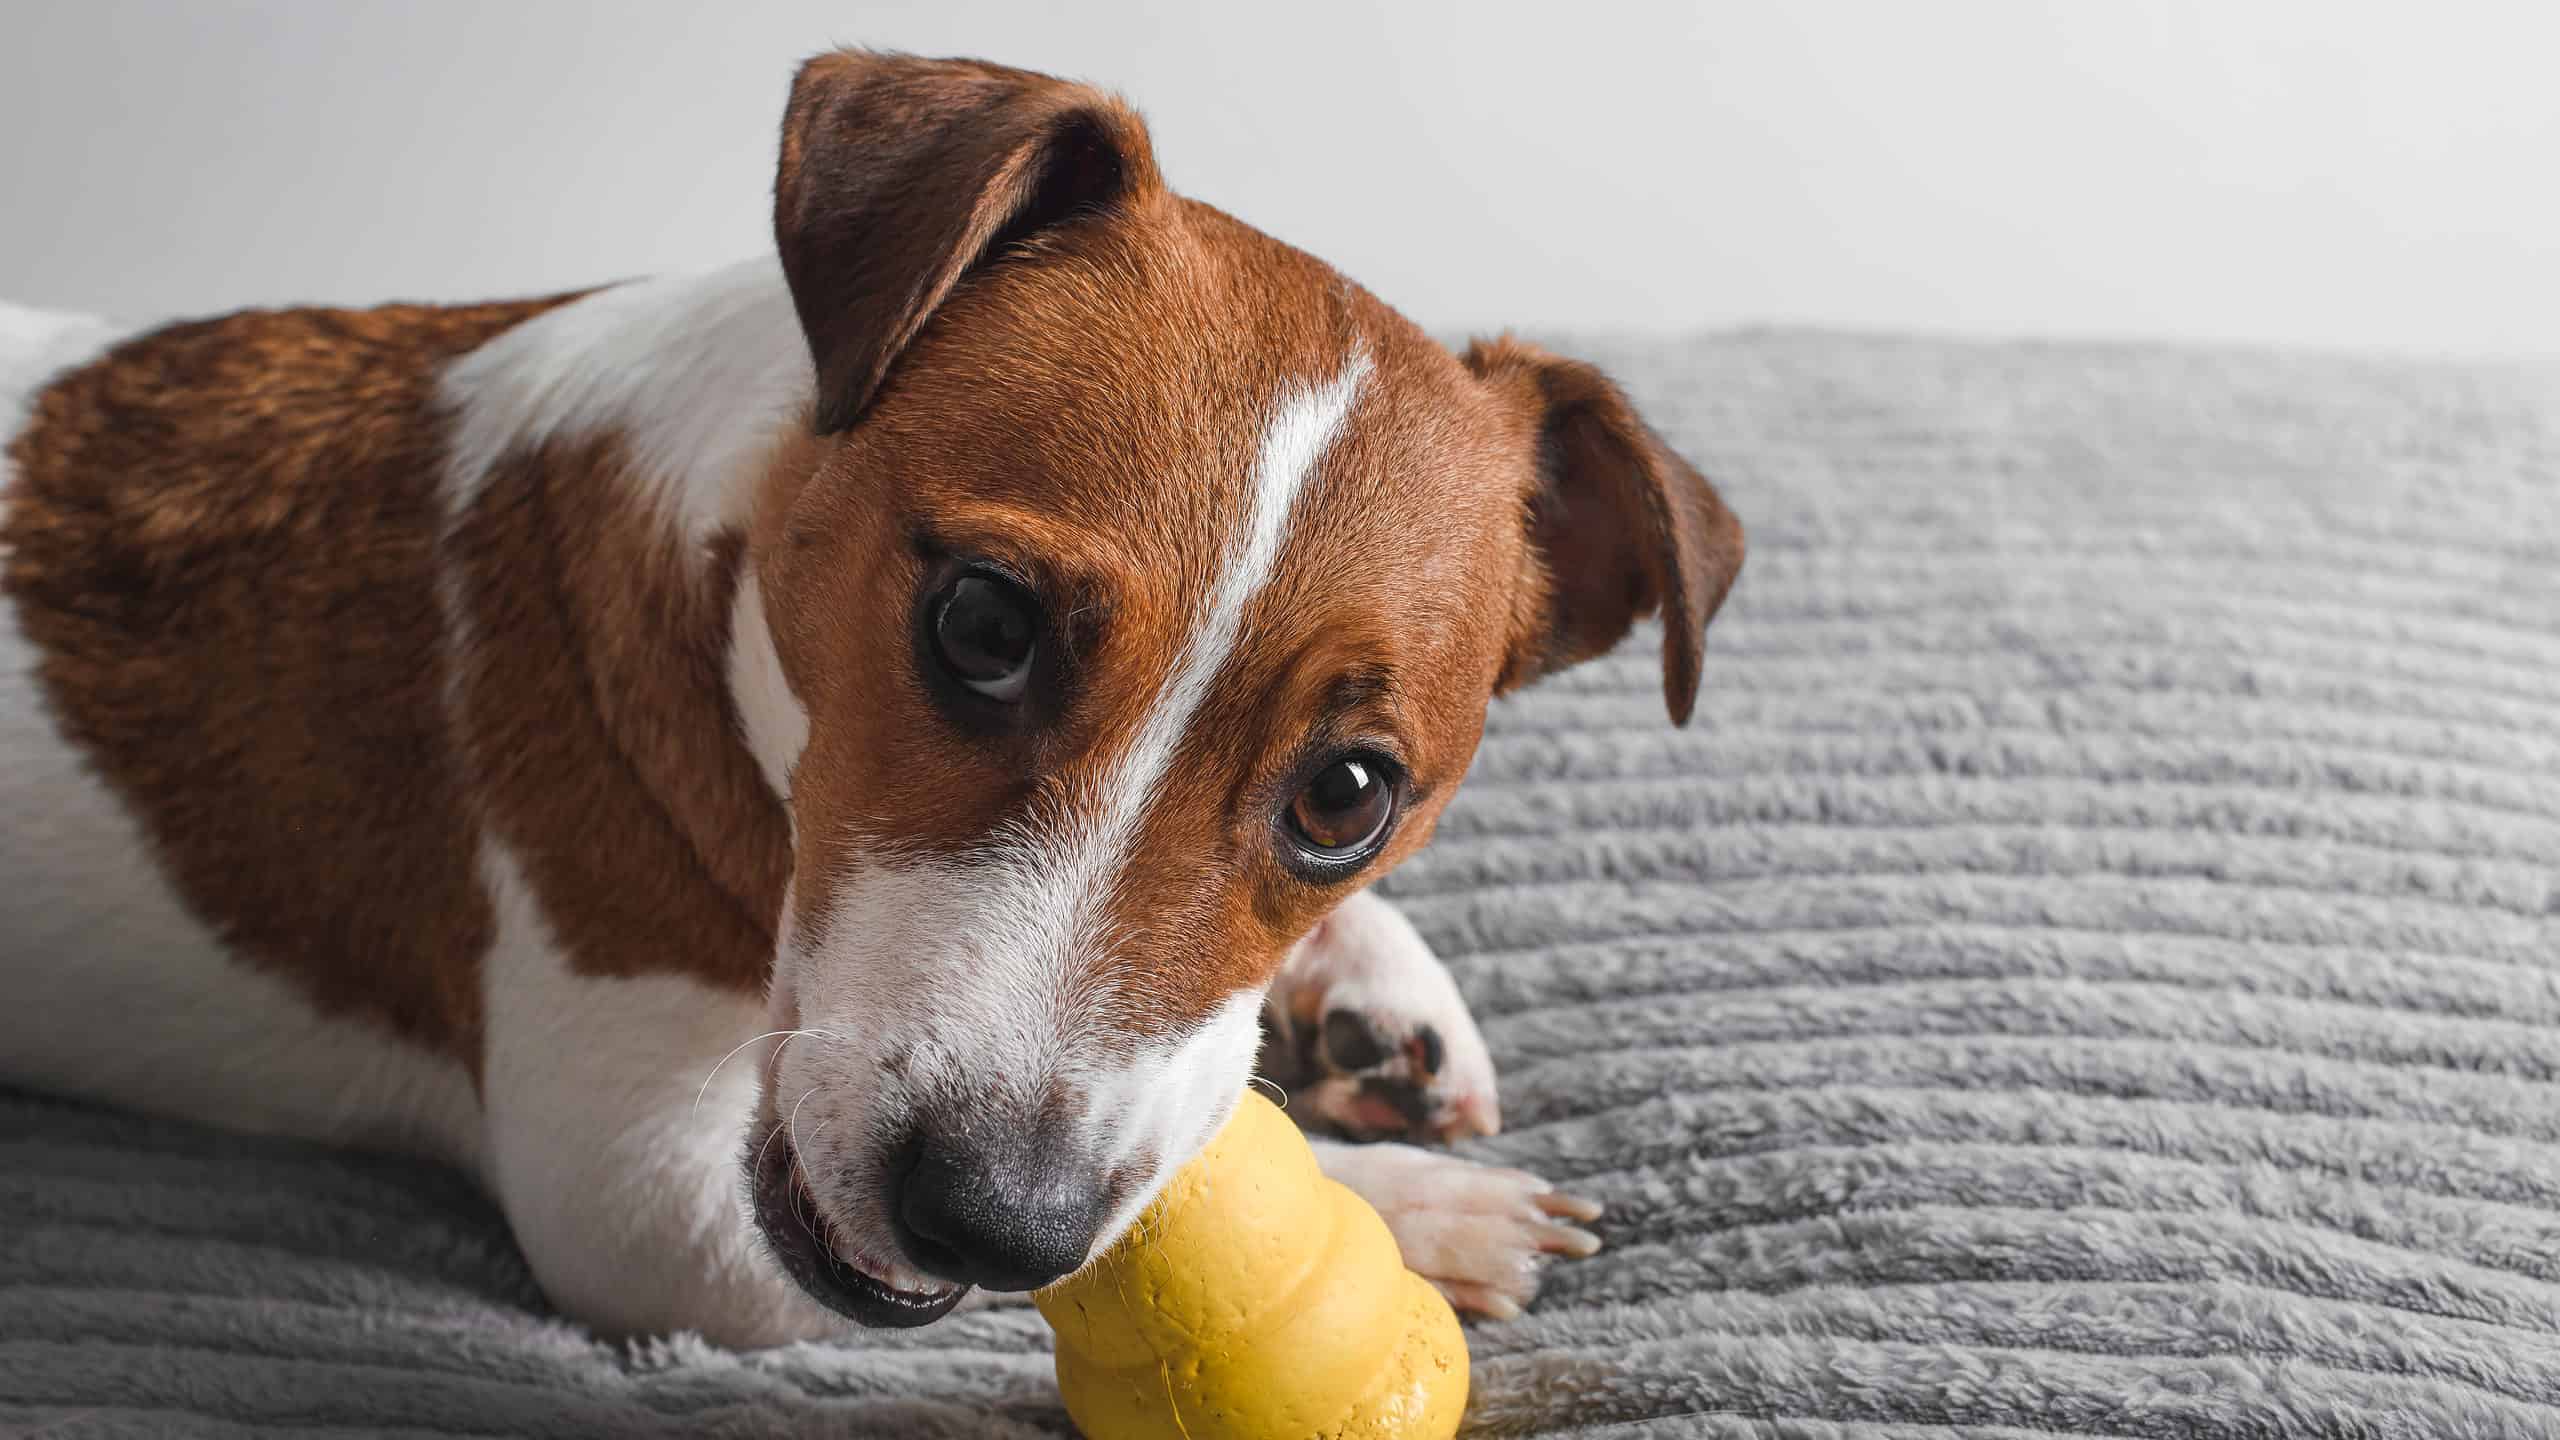 Enrich Your Dog's Life with a DIY Dog Food Toy - Kol's Notes